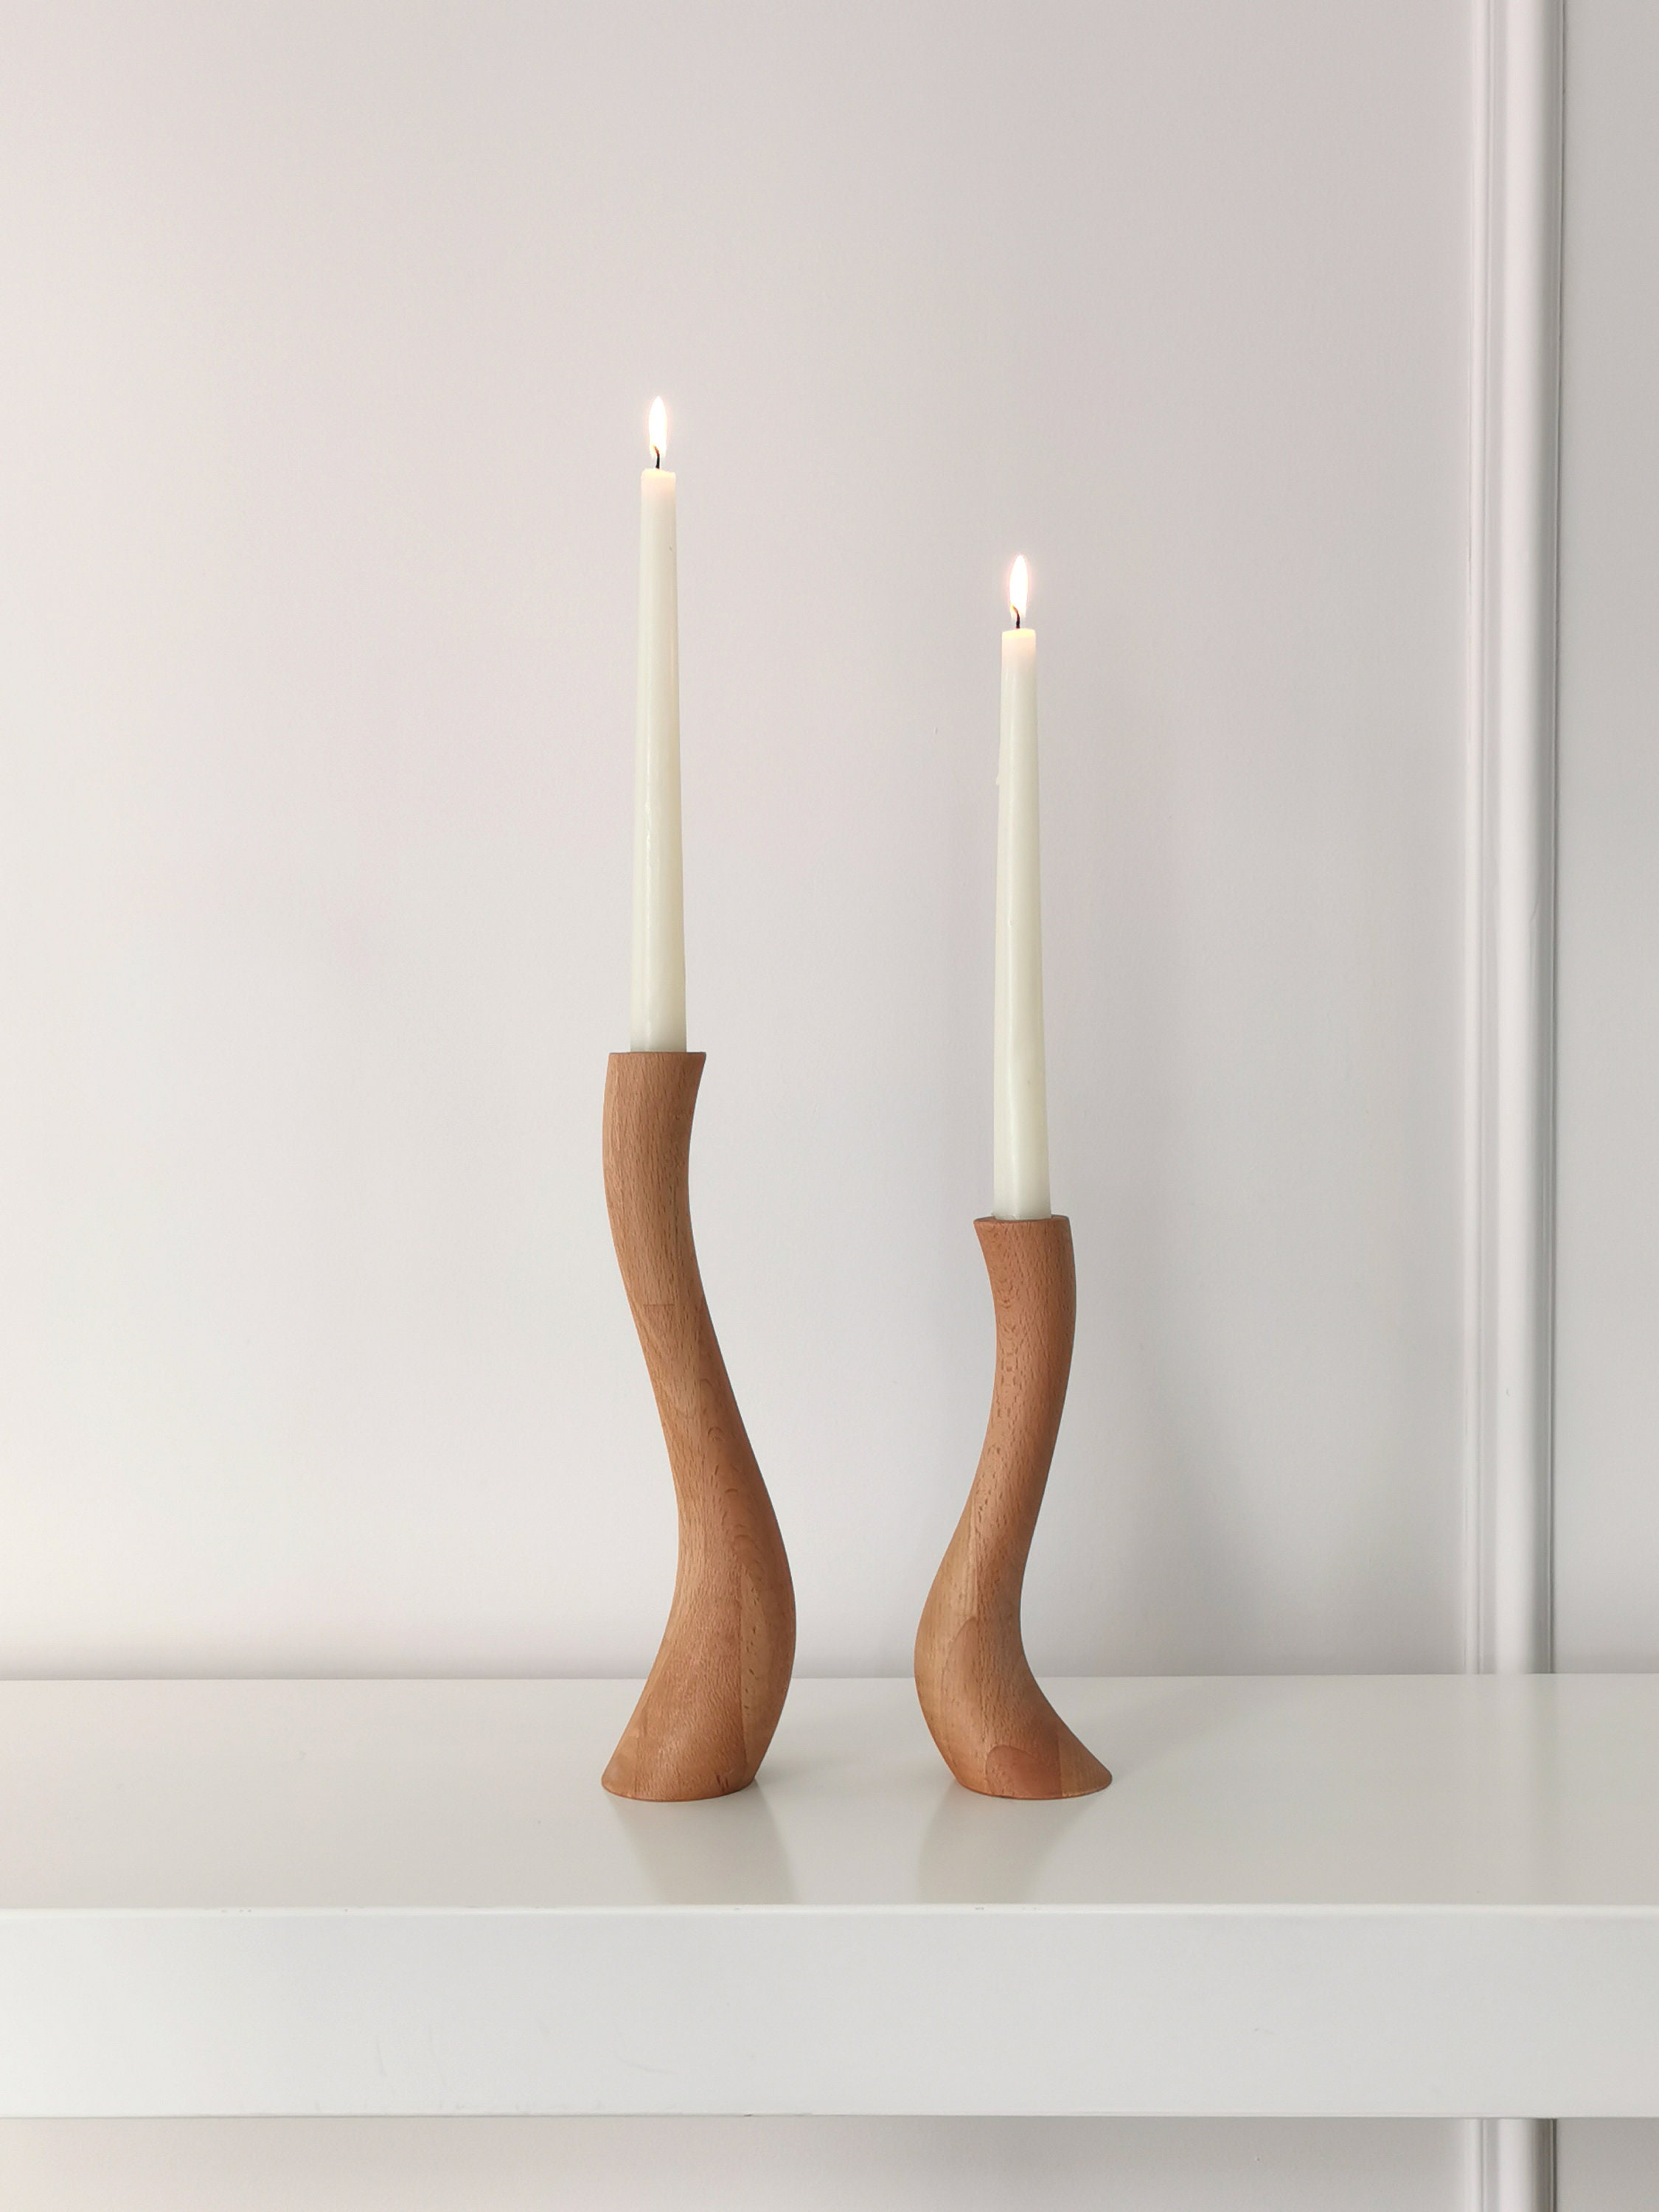 ProdBuy_Ltd Set of 2 Wooden Pillar Candle Holders Brown Design Two 